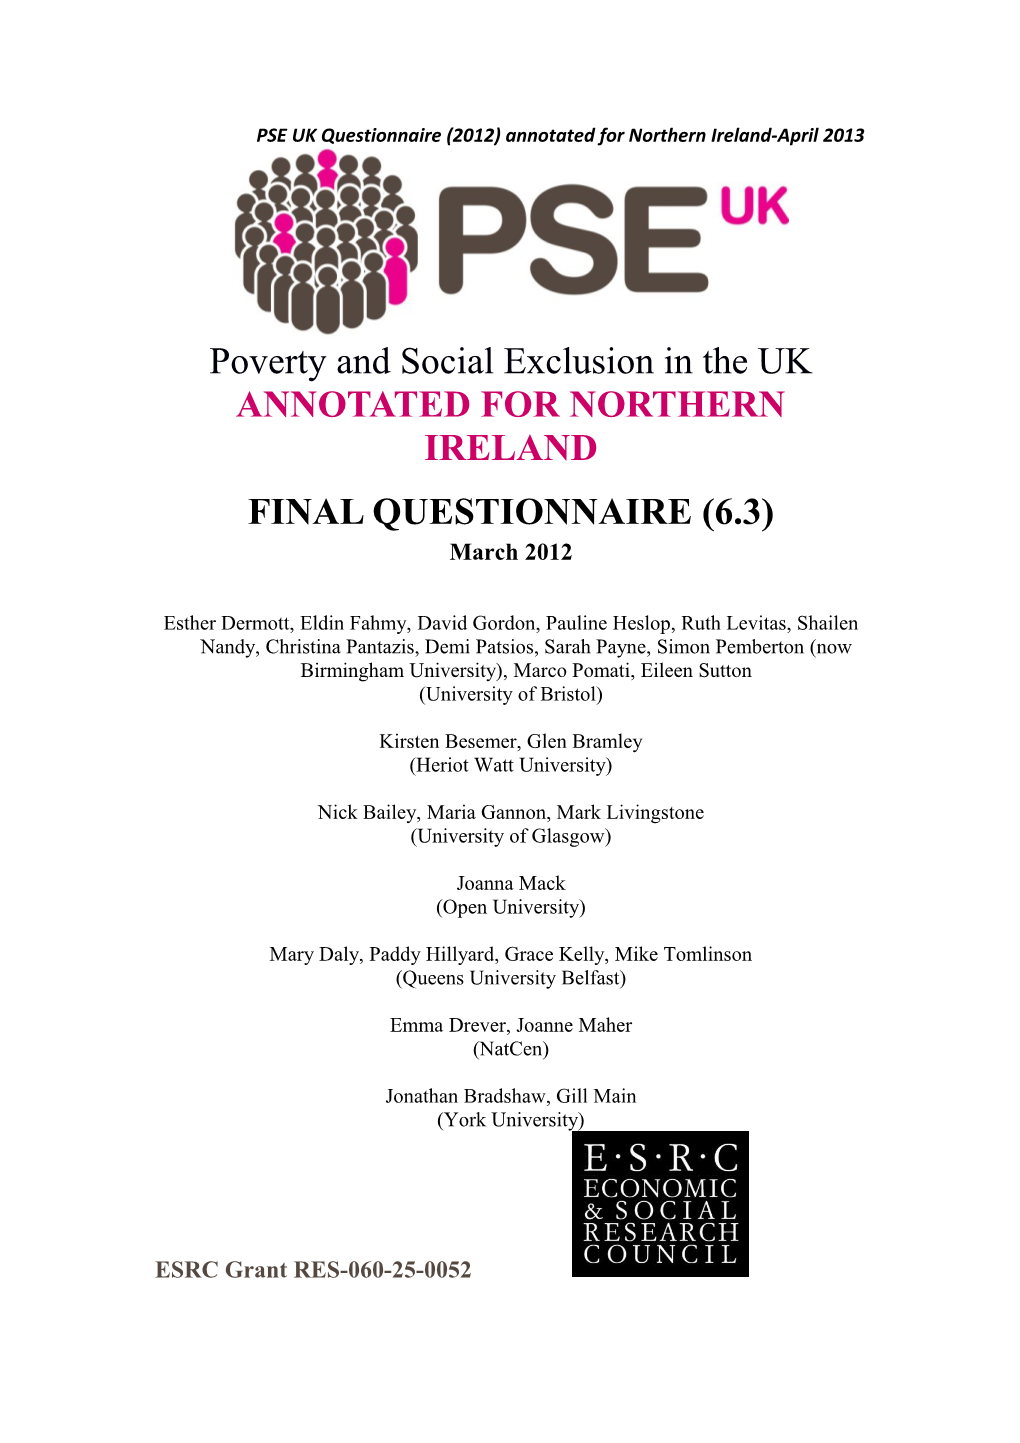 PSE UK Questionnaire (2012) Annotated for Northern Ireland-April 2013